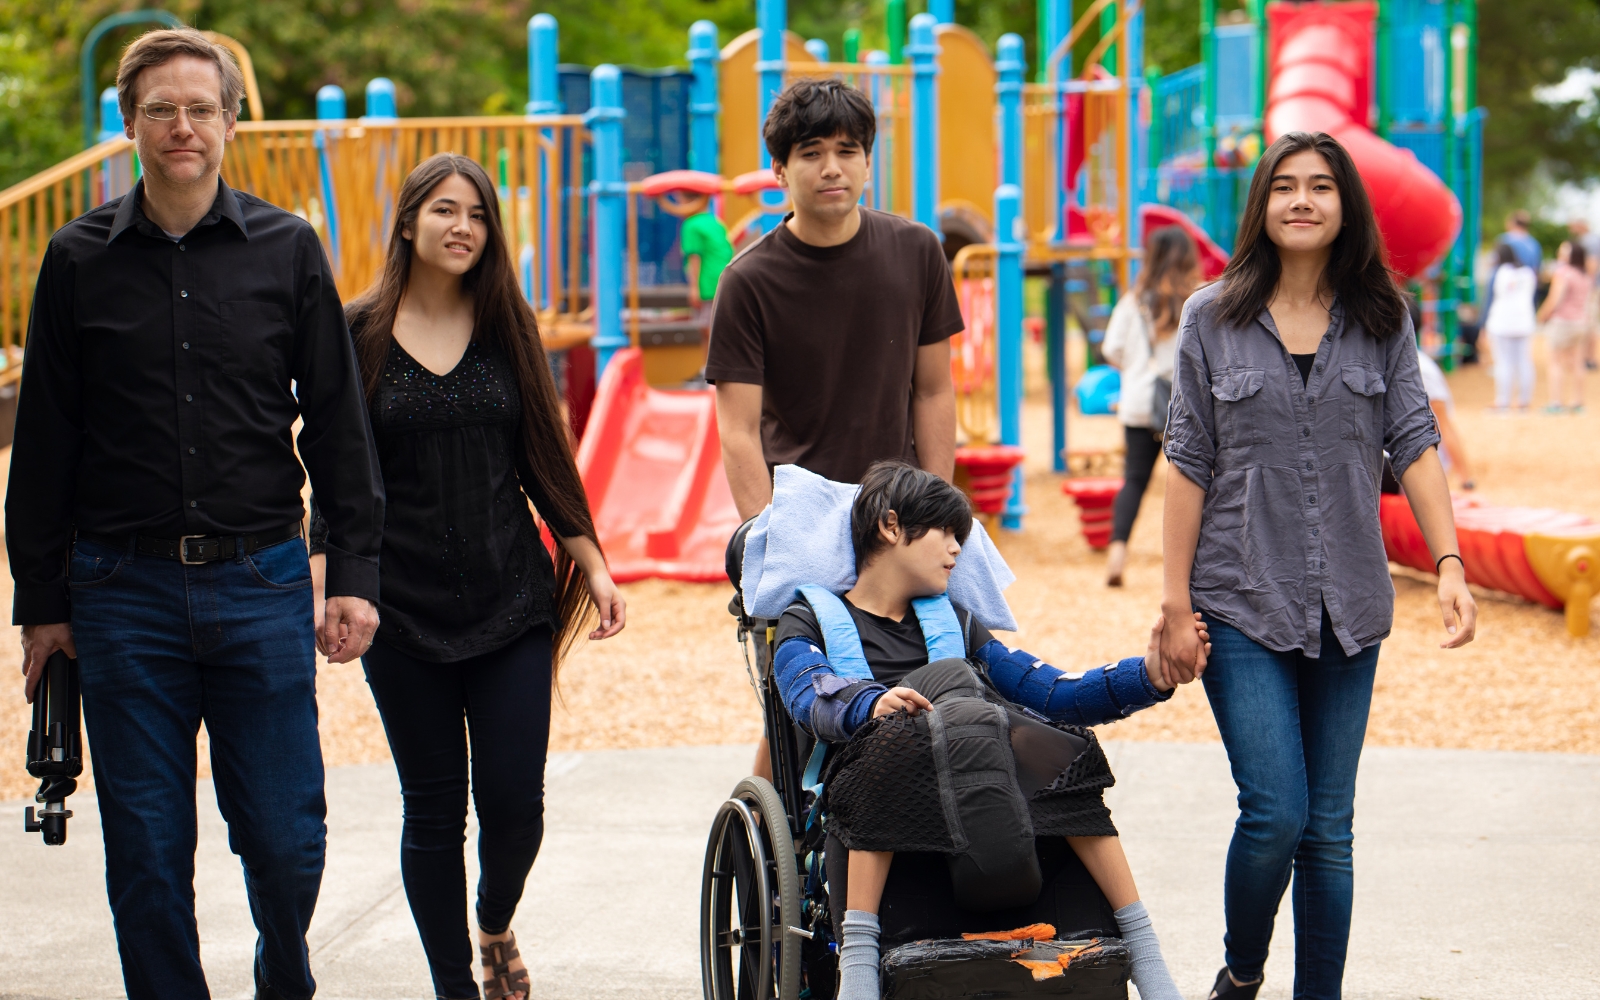 Child with disabilities in a wheel chair holding a woman's hand as she and the rest of the family walks away from a playground